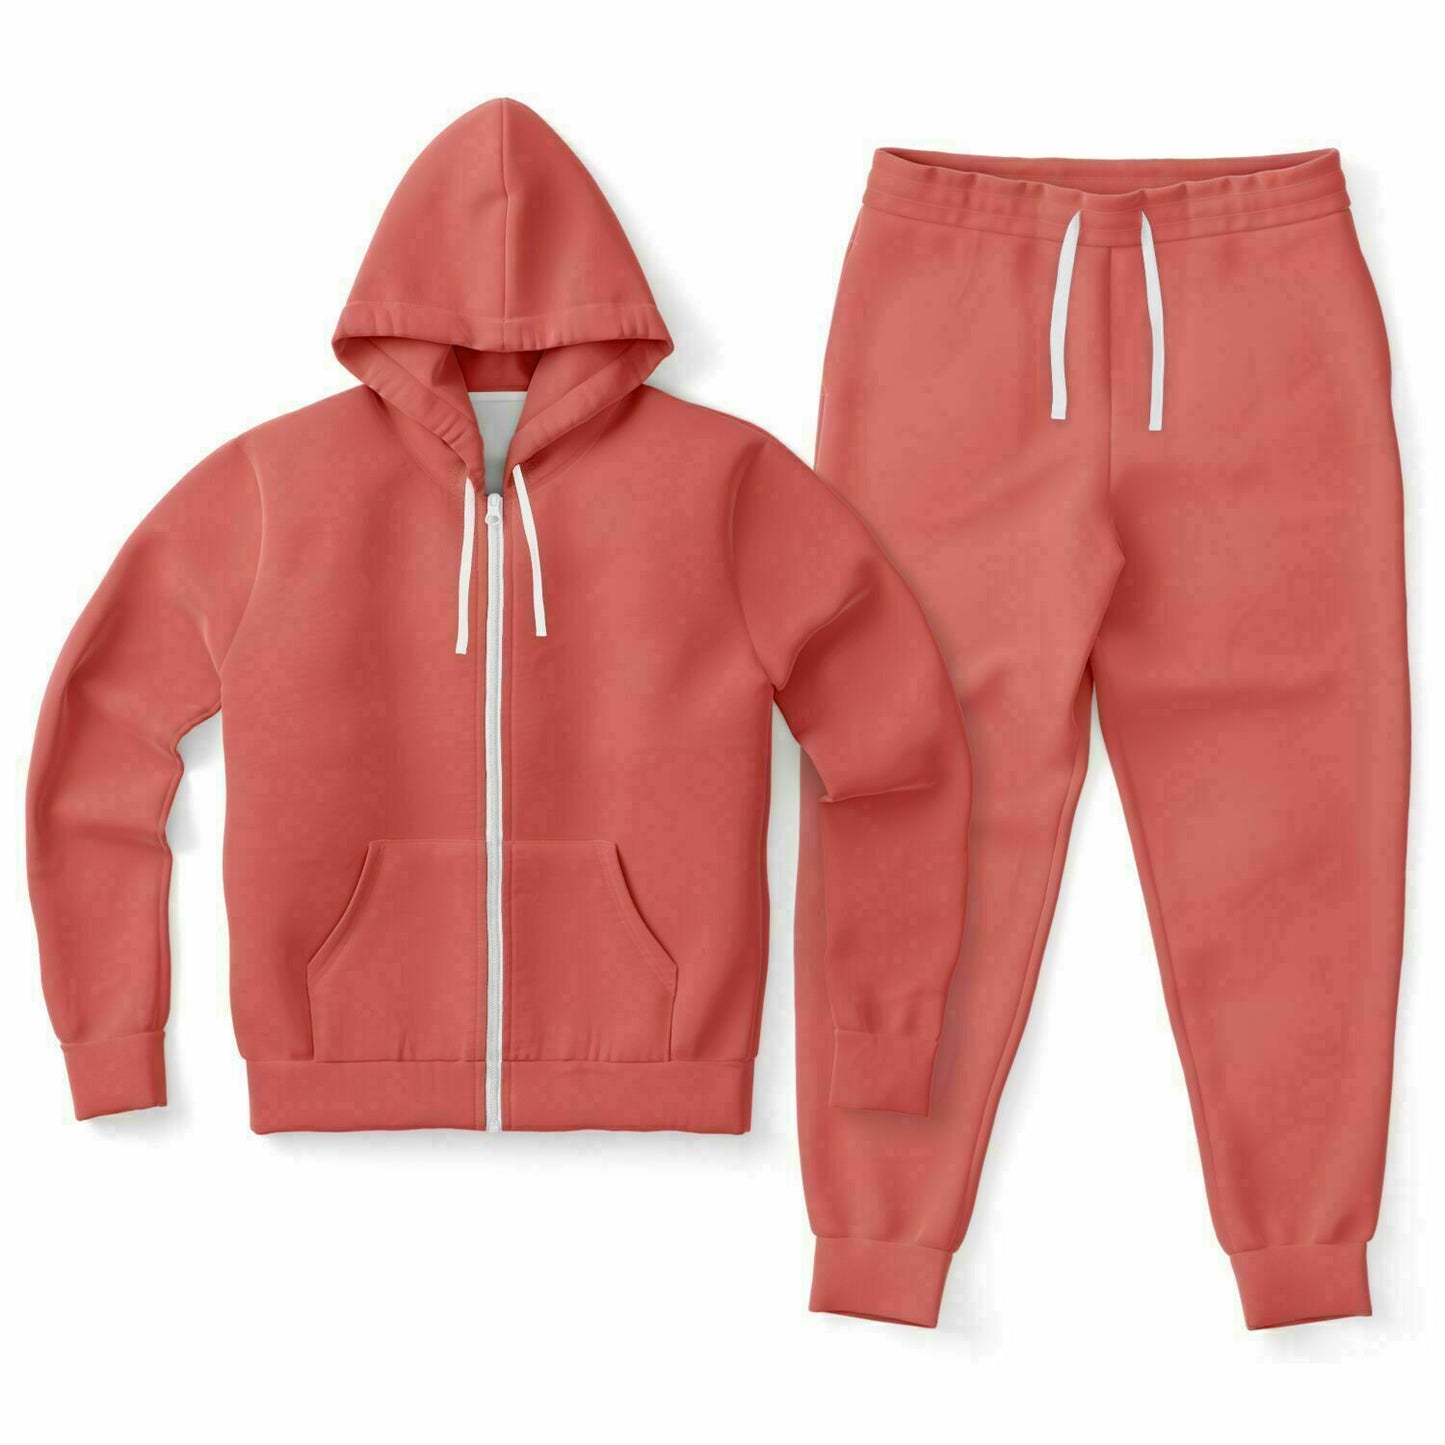 Tan Pink Zipper Hoodie and Jogger Set - XS / XS - Sport Finesse